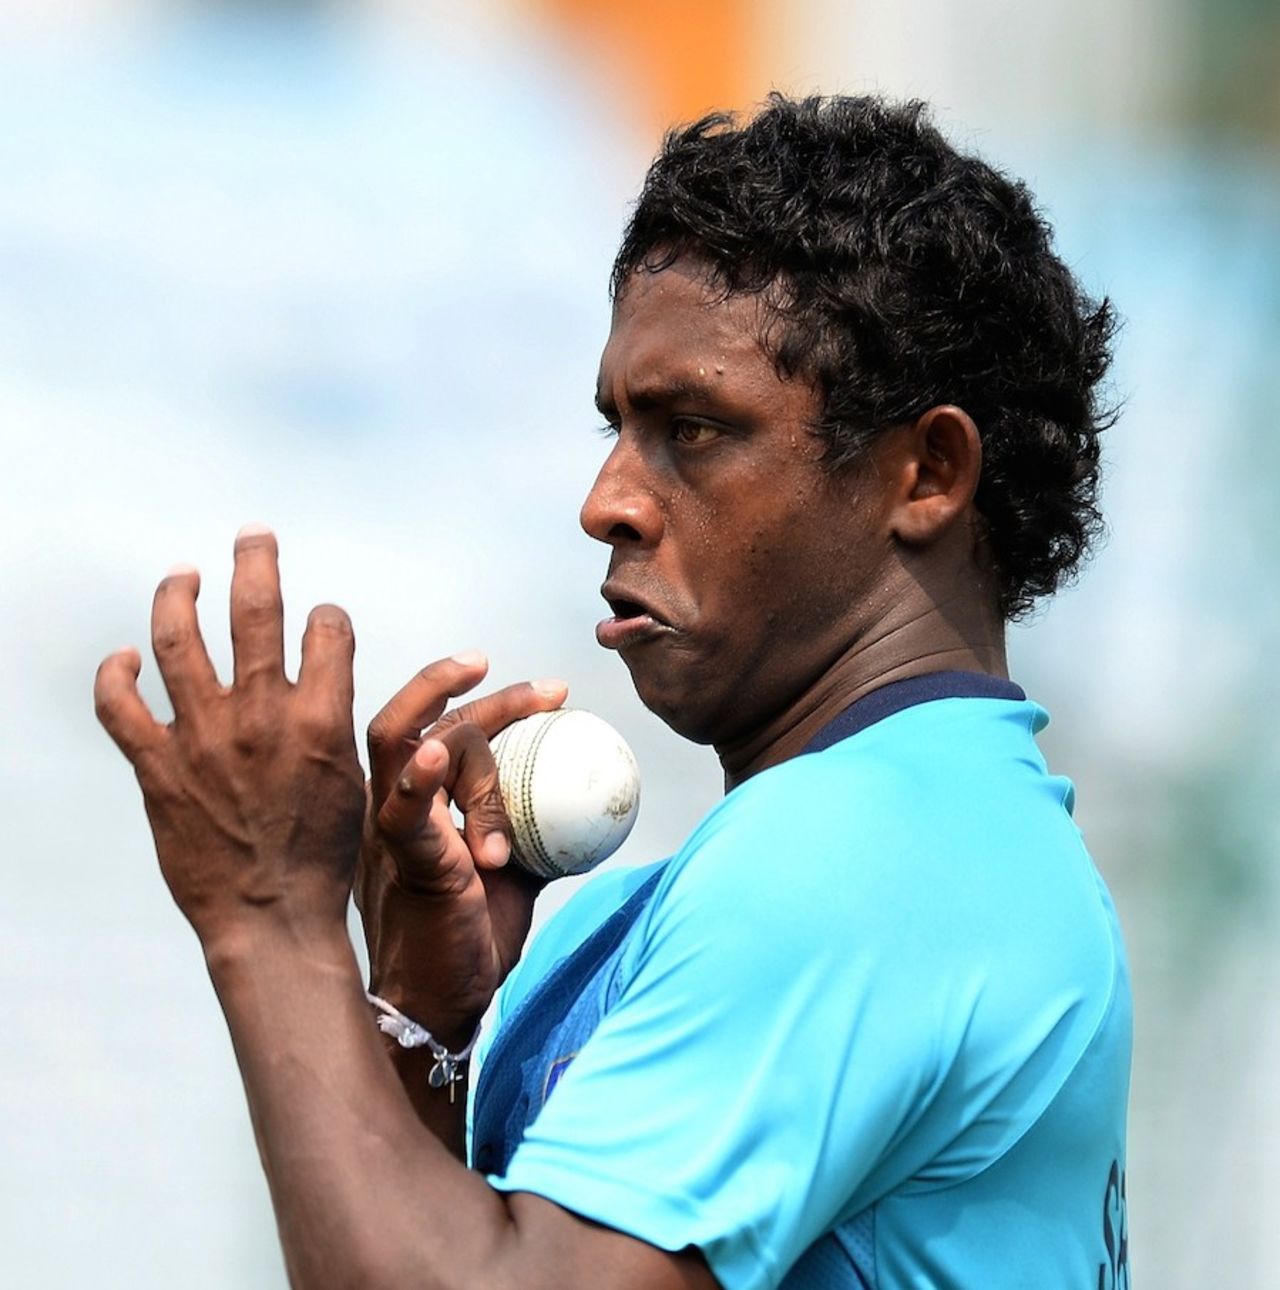 The twister: Ajantha Mendis bowls during a practice session, Chittagong, March 21, 2014